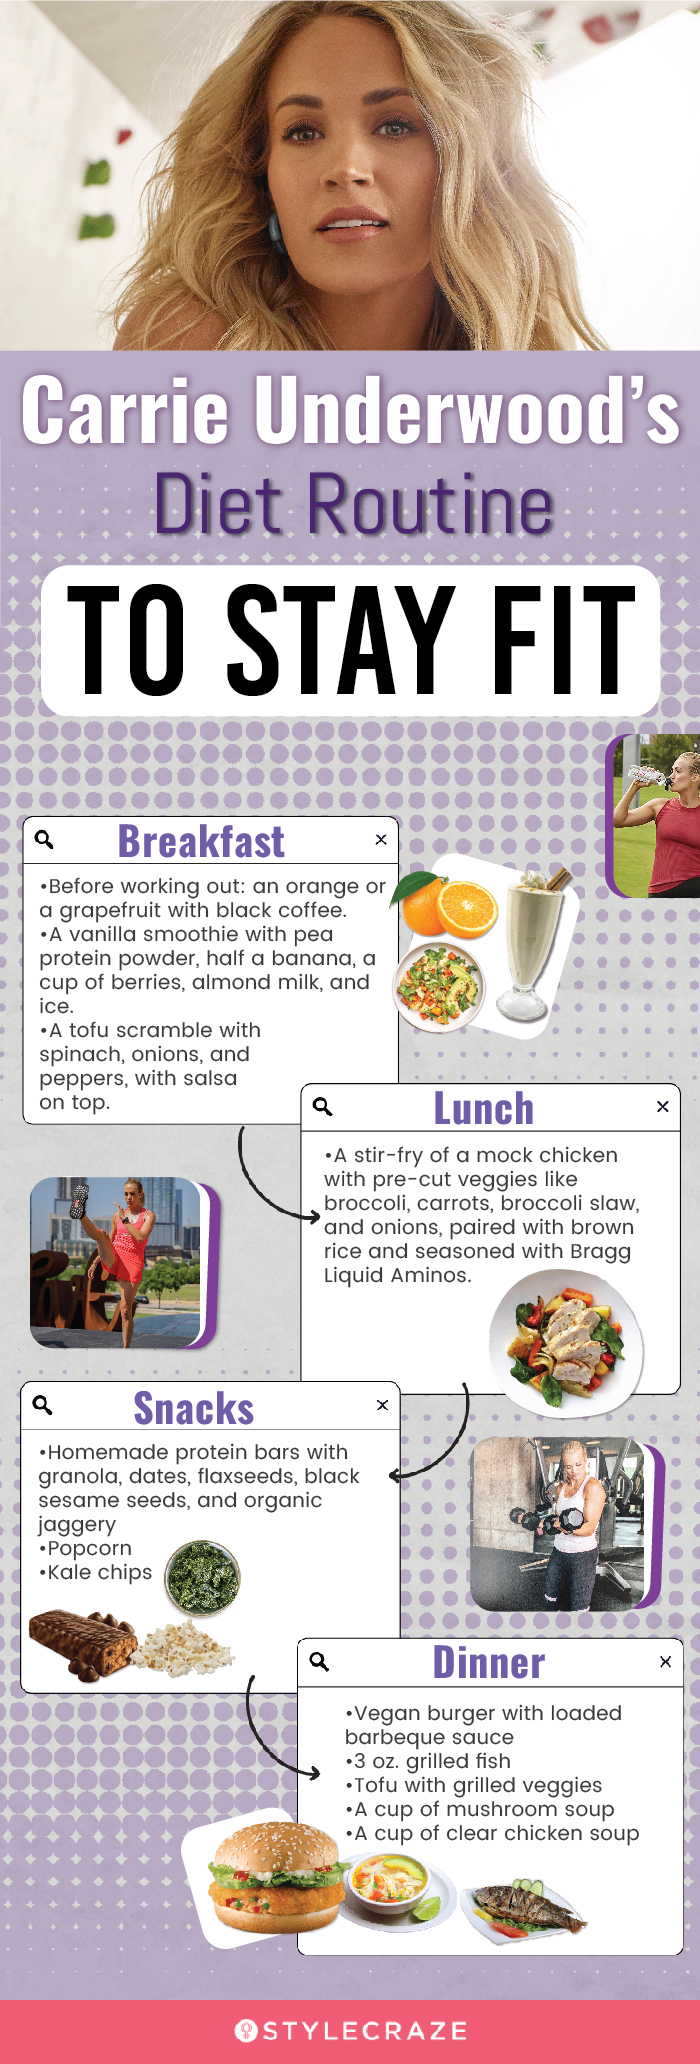 carrie underwood’s diet routine to stay fit (infographic)